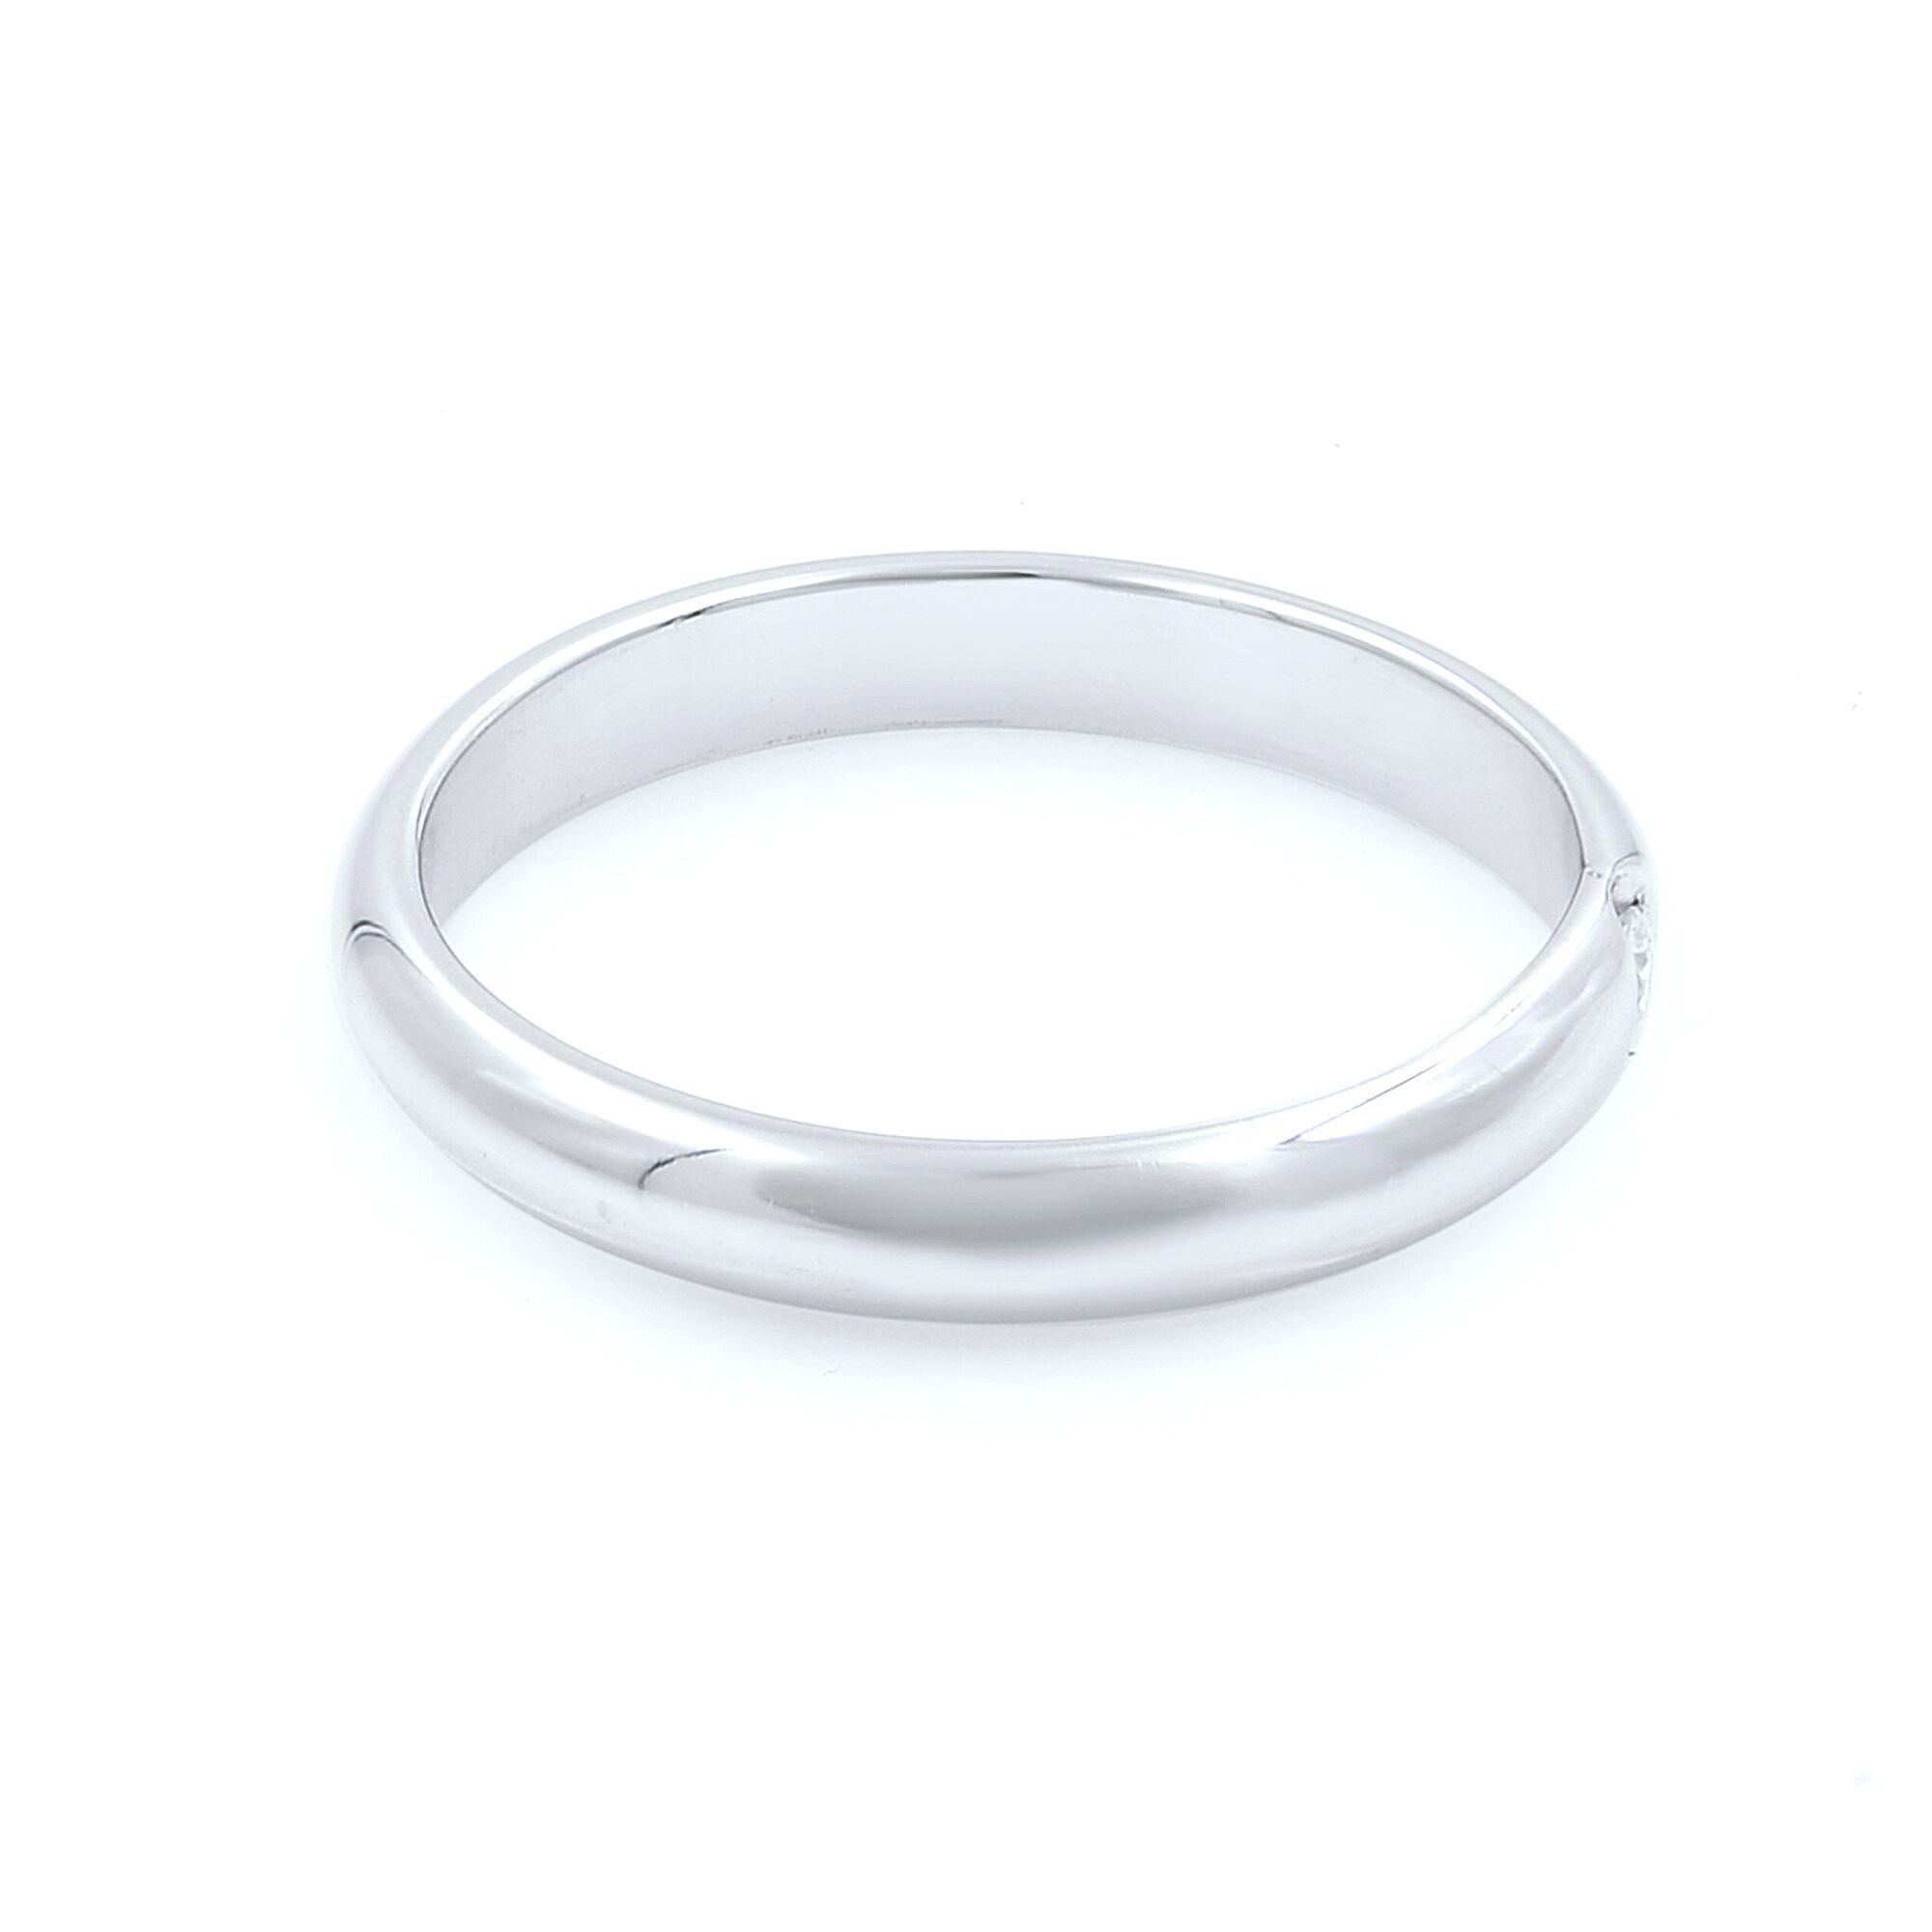 This is a Salvini wedding band. The solid presence of platinum makes the perfect statement of lasting love. The light overall weight of this style, its classic low-profile aesthetic make it perfect for everyday wear. The diamond at the center gives